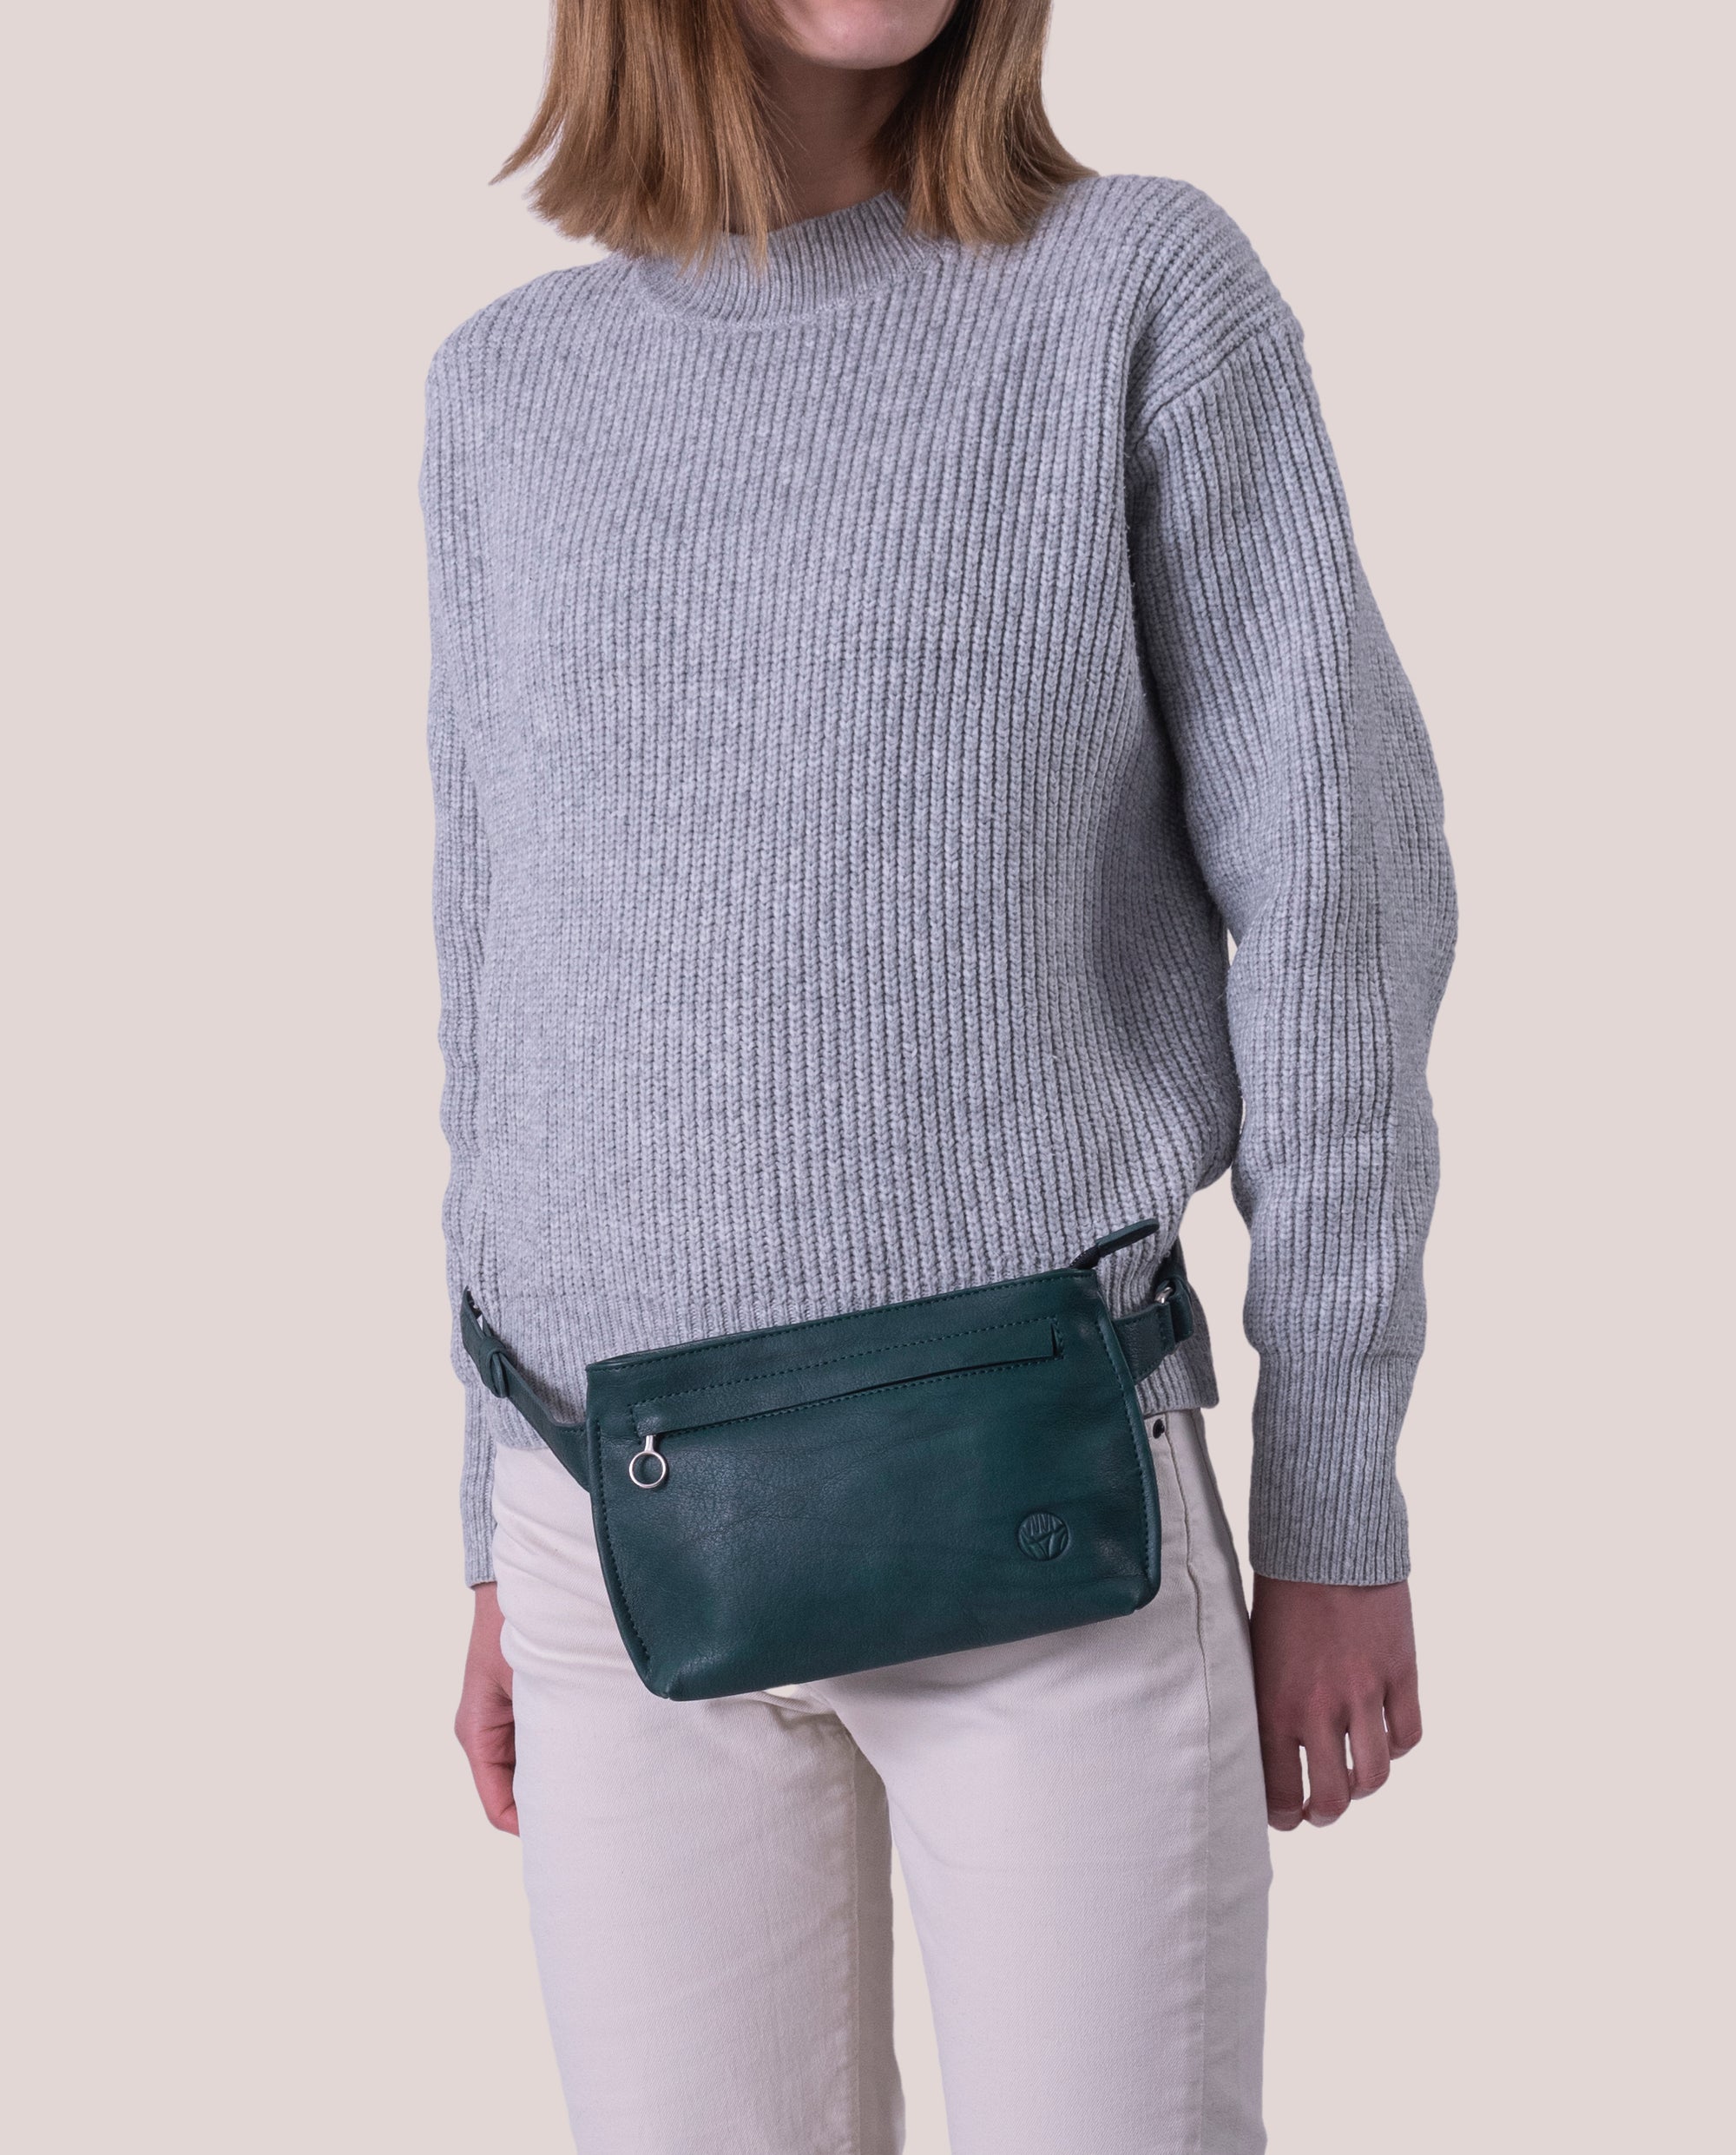 Chacoral Beltbag small